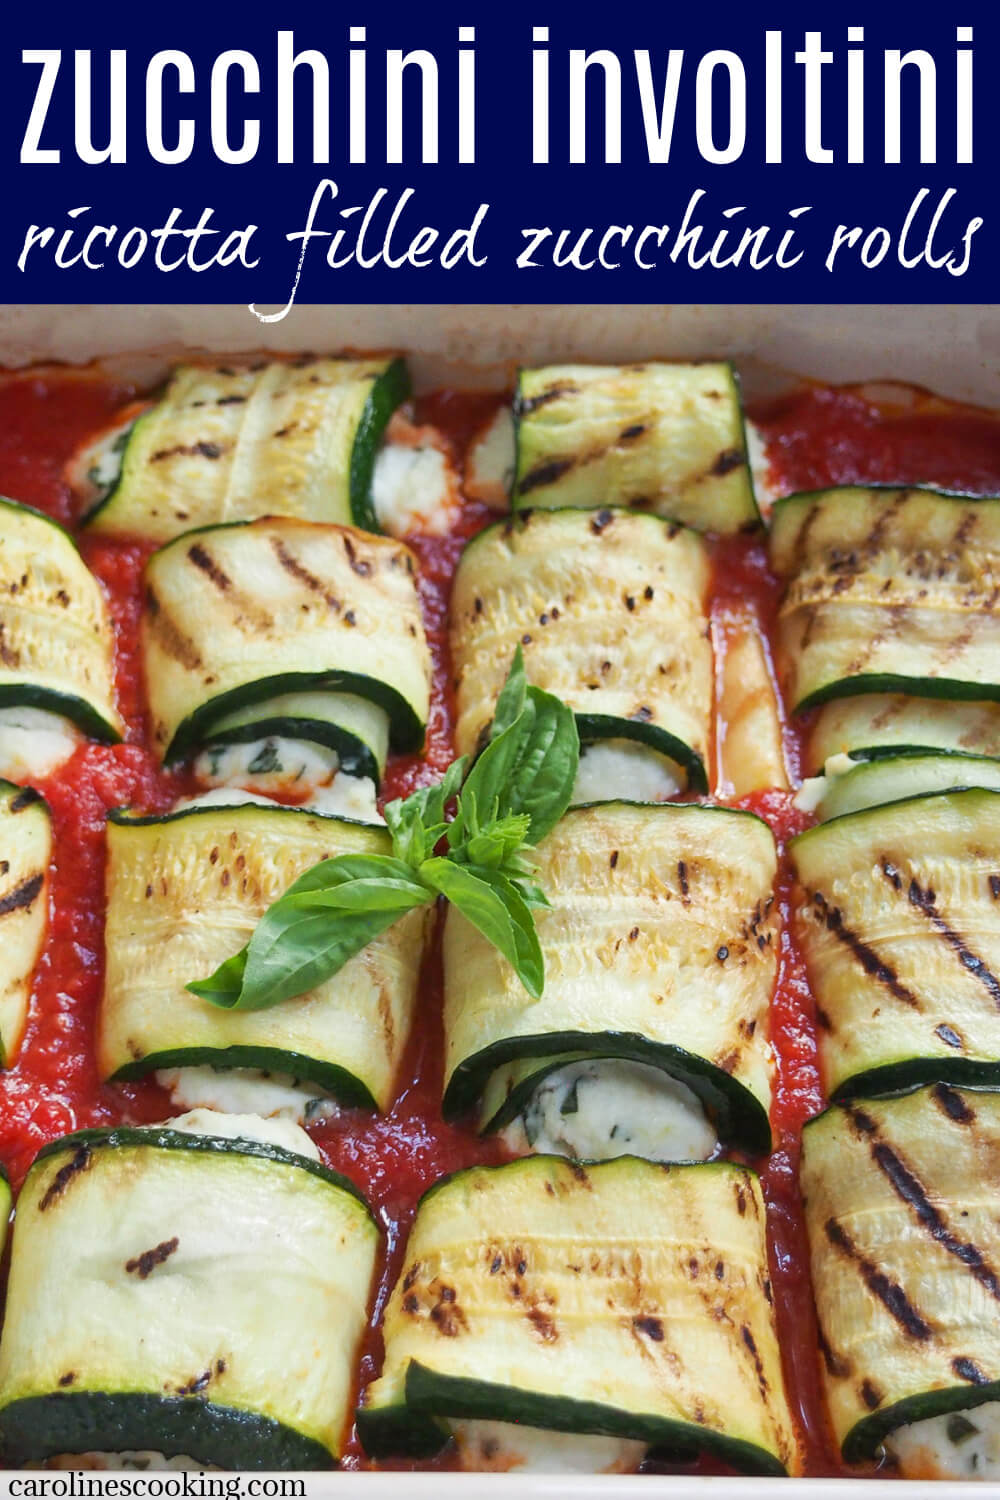 These zucchini involtini are a delicious combination of grilled zucchini wrapped around a basil and lemon seasoned ricotta filling, nestled in marinara sauce.  It's surprisingly light, comforting and incredibly tasty.